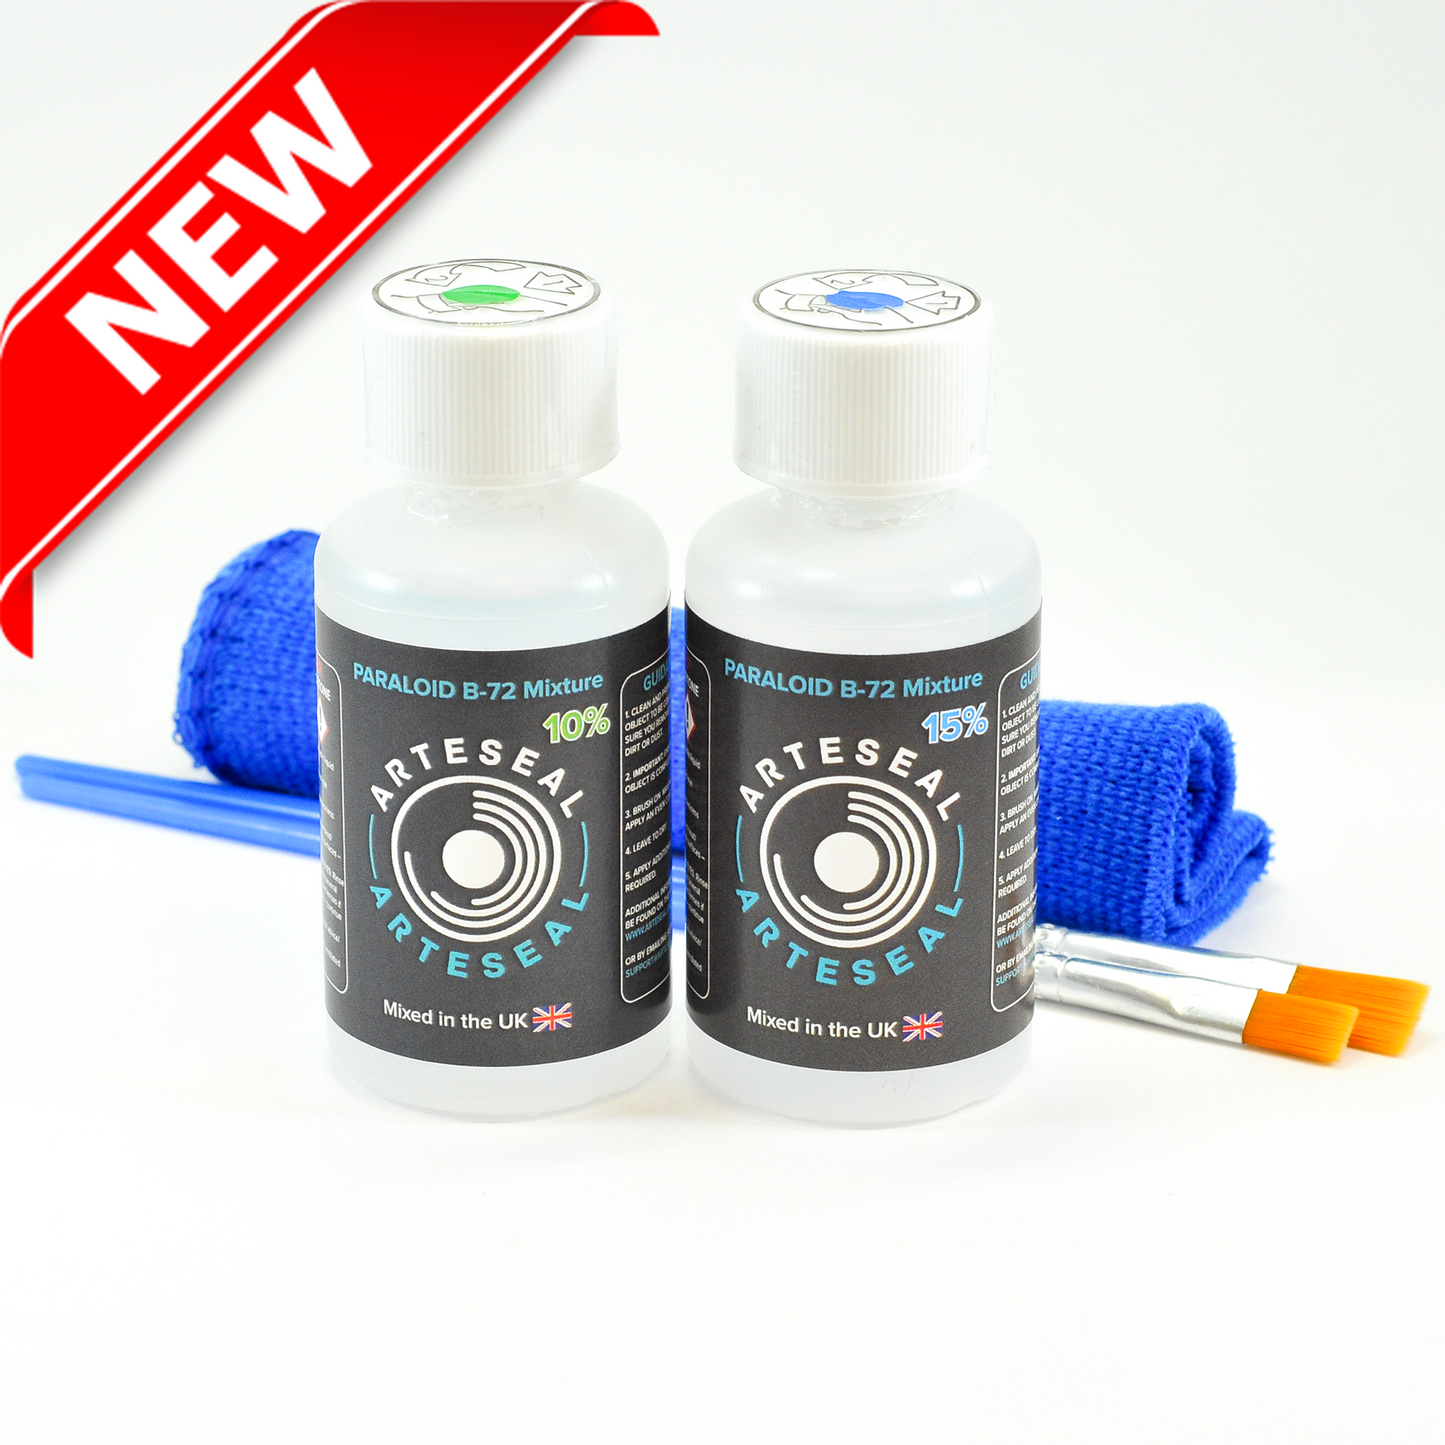 Paraloid™ B-72 (Twin Pack) 2 x 50ml (10% & 15% Concentration)